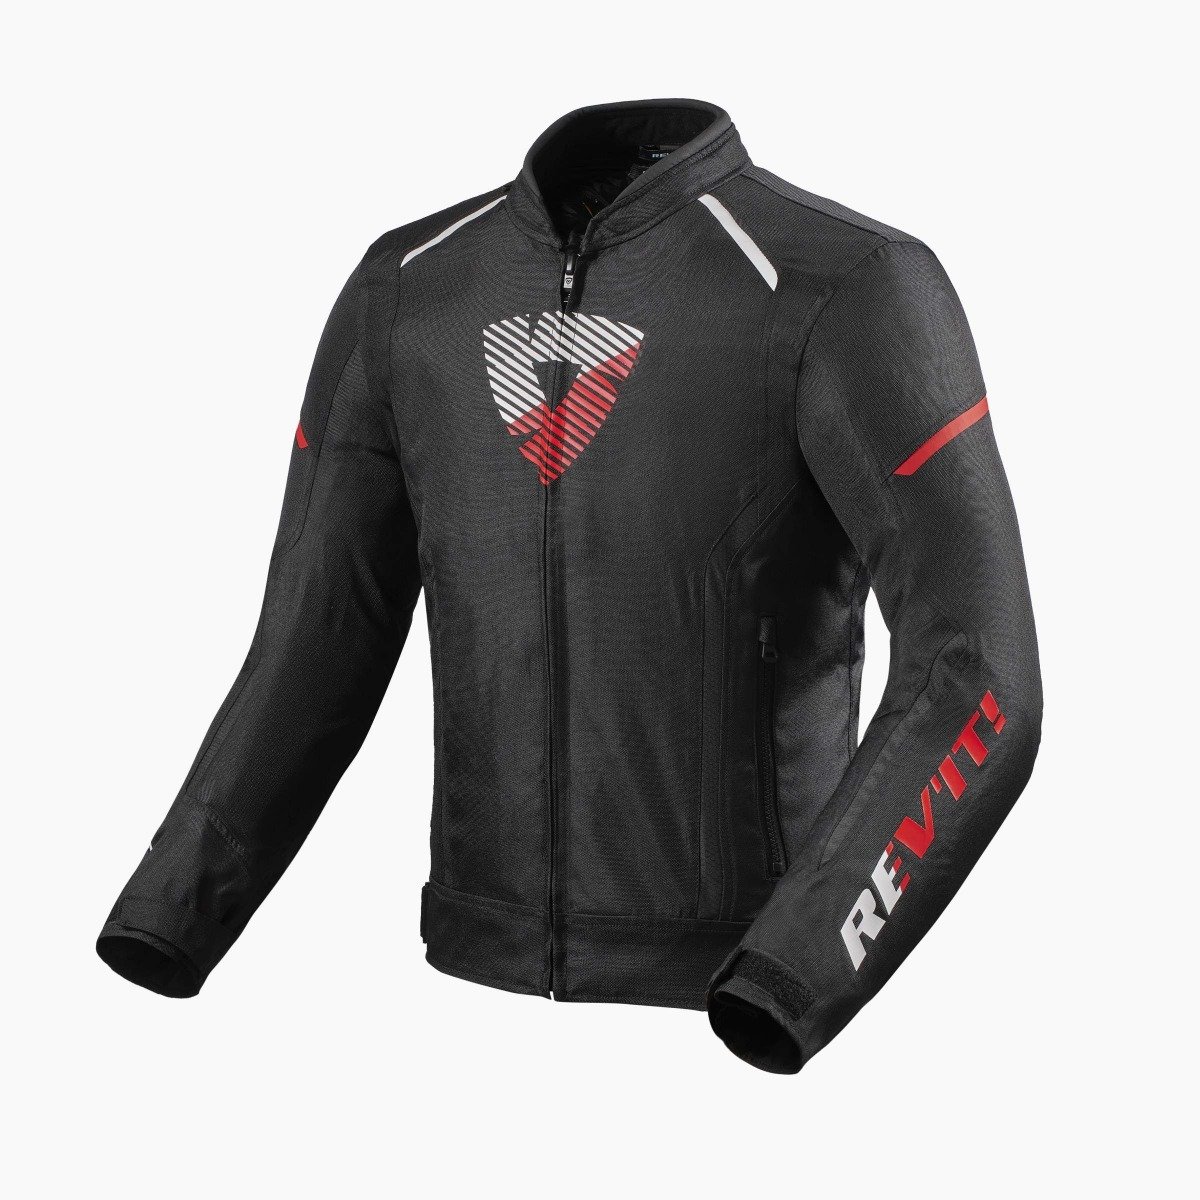 Image of REV'IT! Sprint H2O Jacket Black Neon Red Size S ID 8700001311809